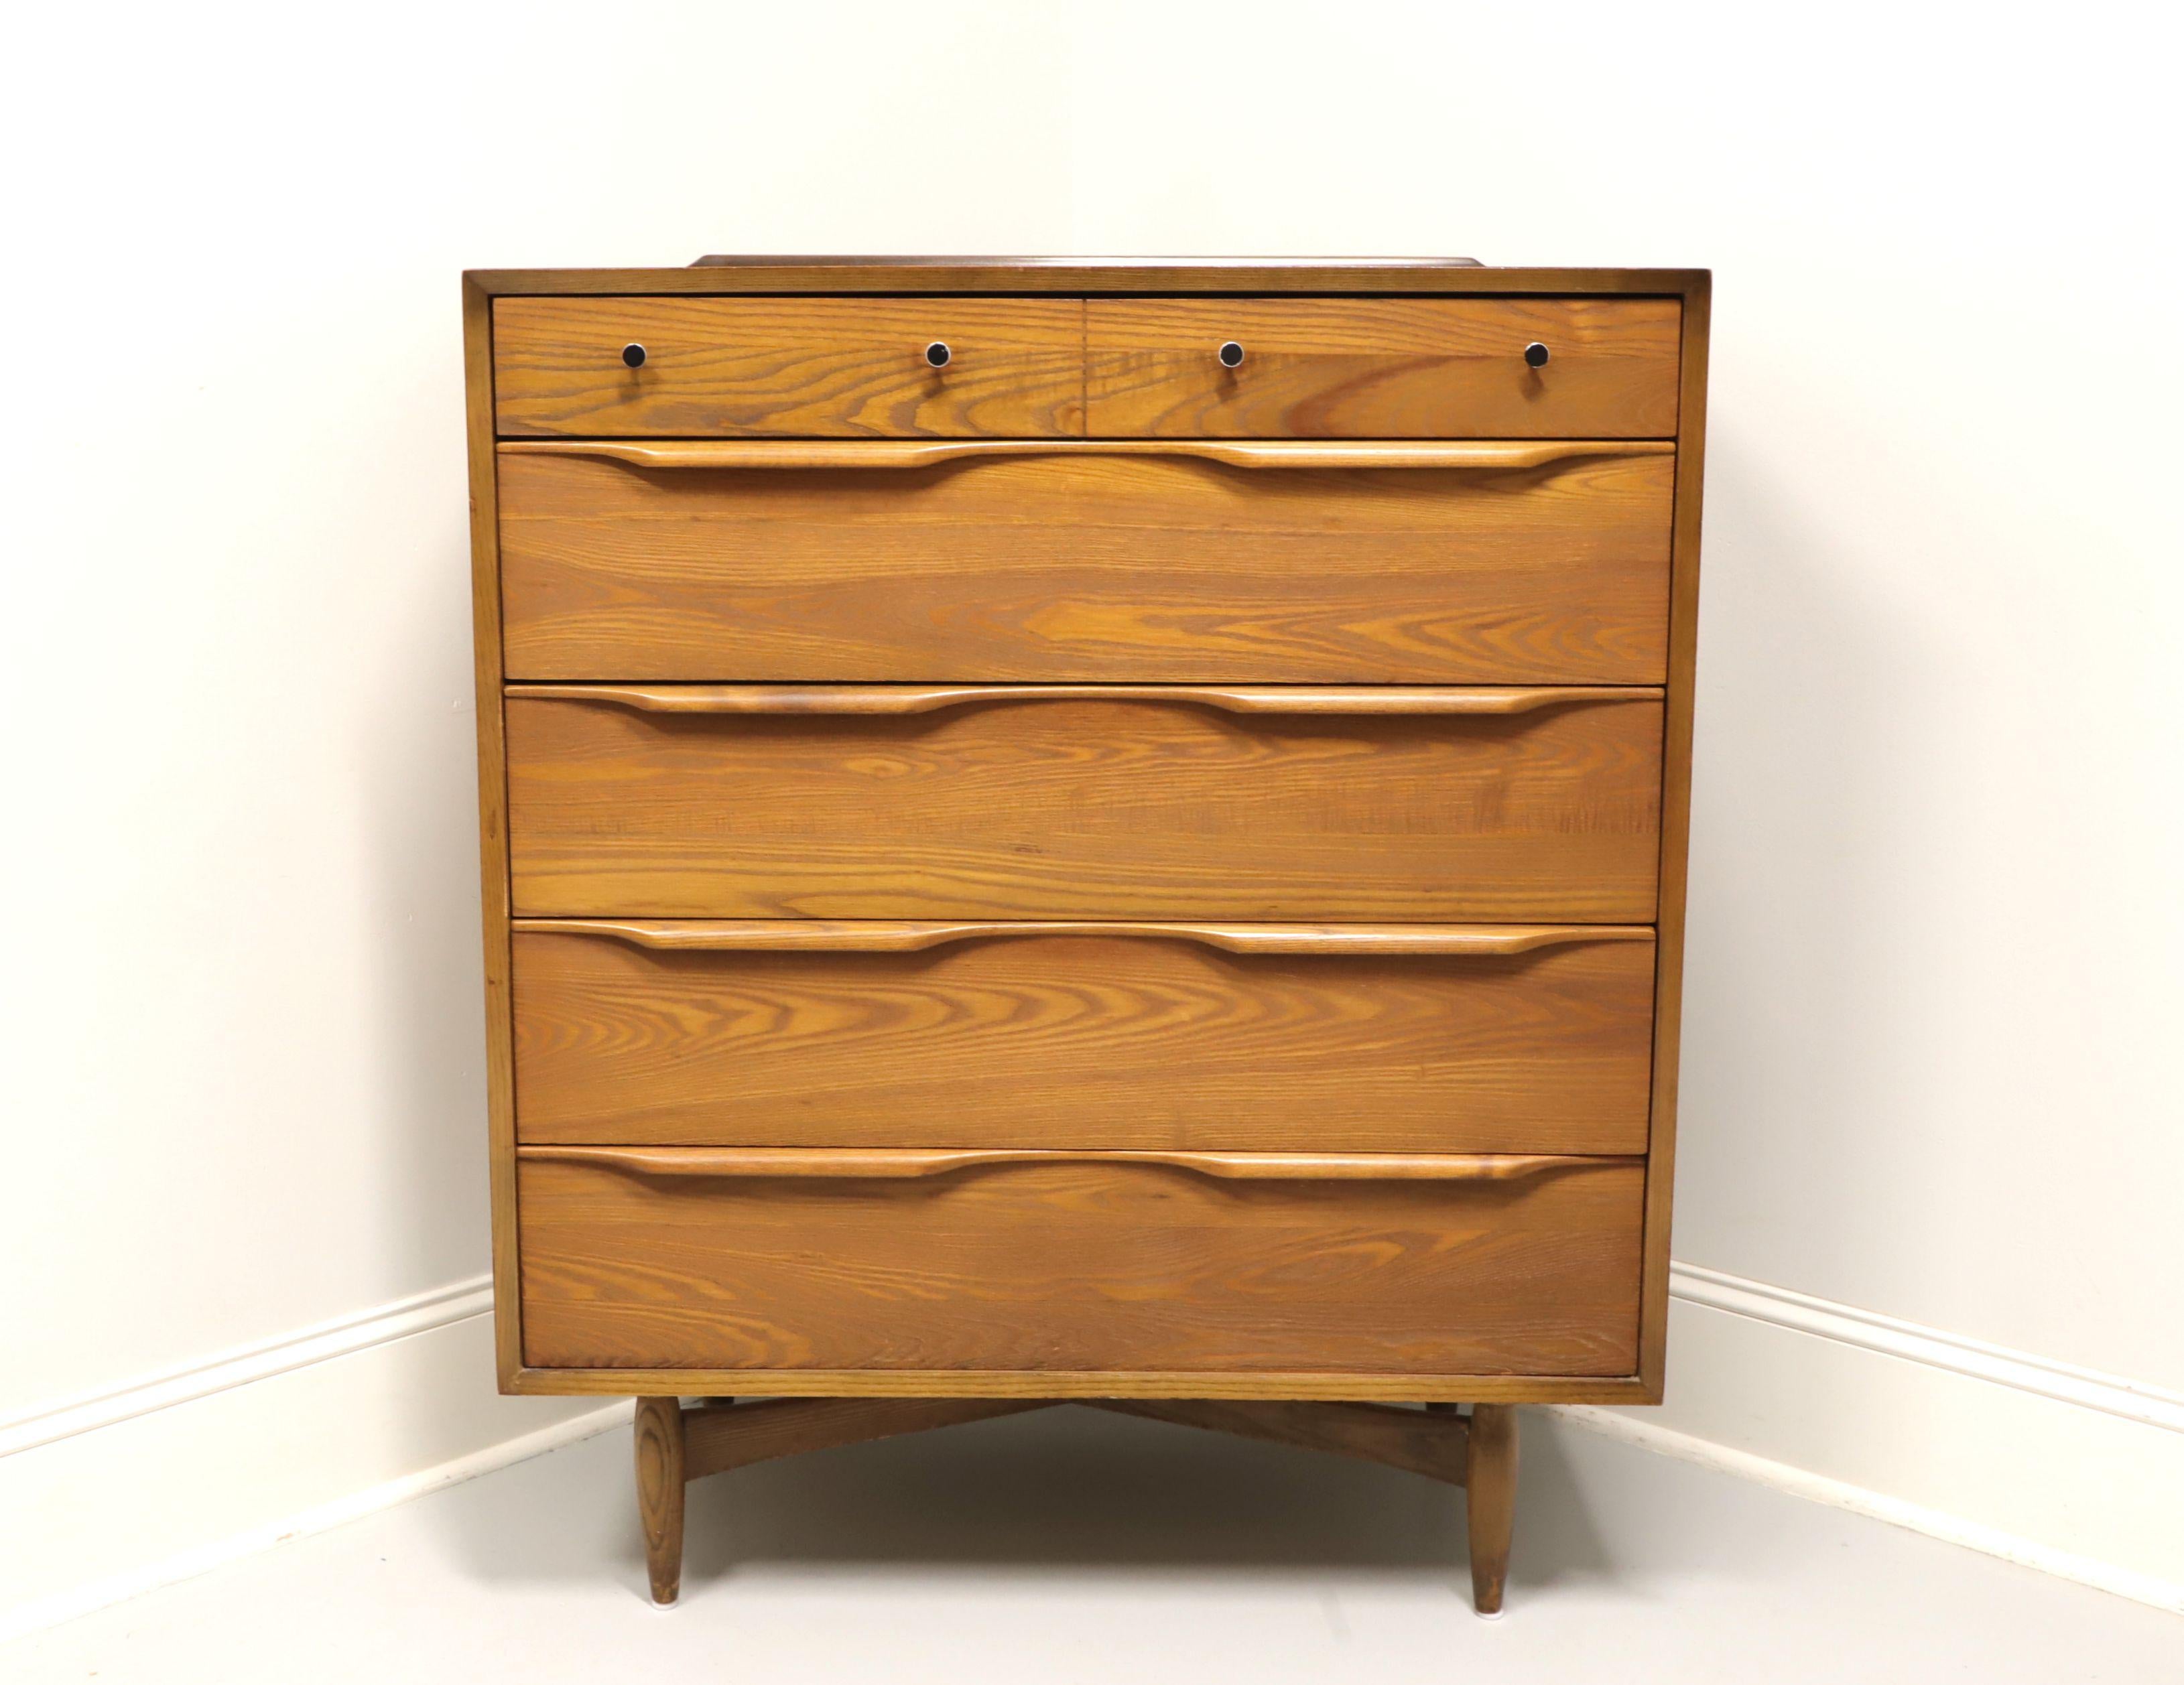 A Mid-20th Century Modern chest of drawers by Heywood Wakefield. Walnut with metal hardware, wood back gallery to top, 